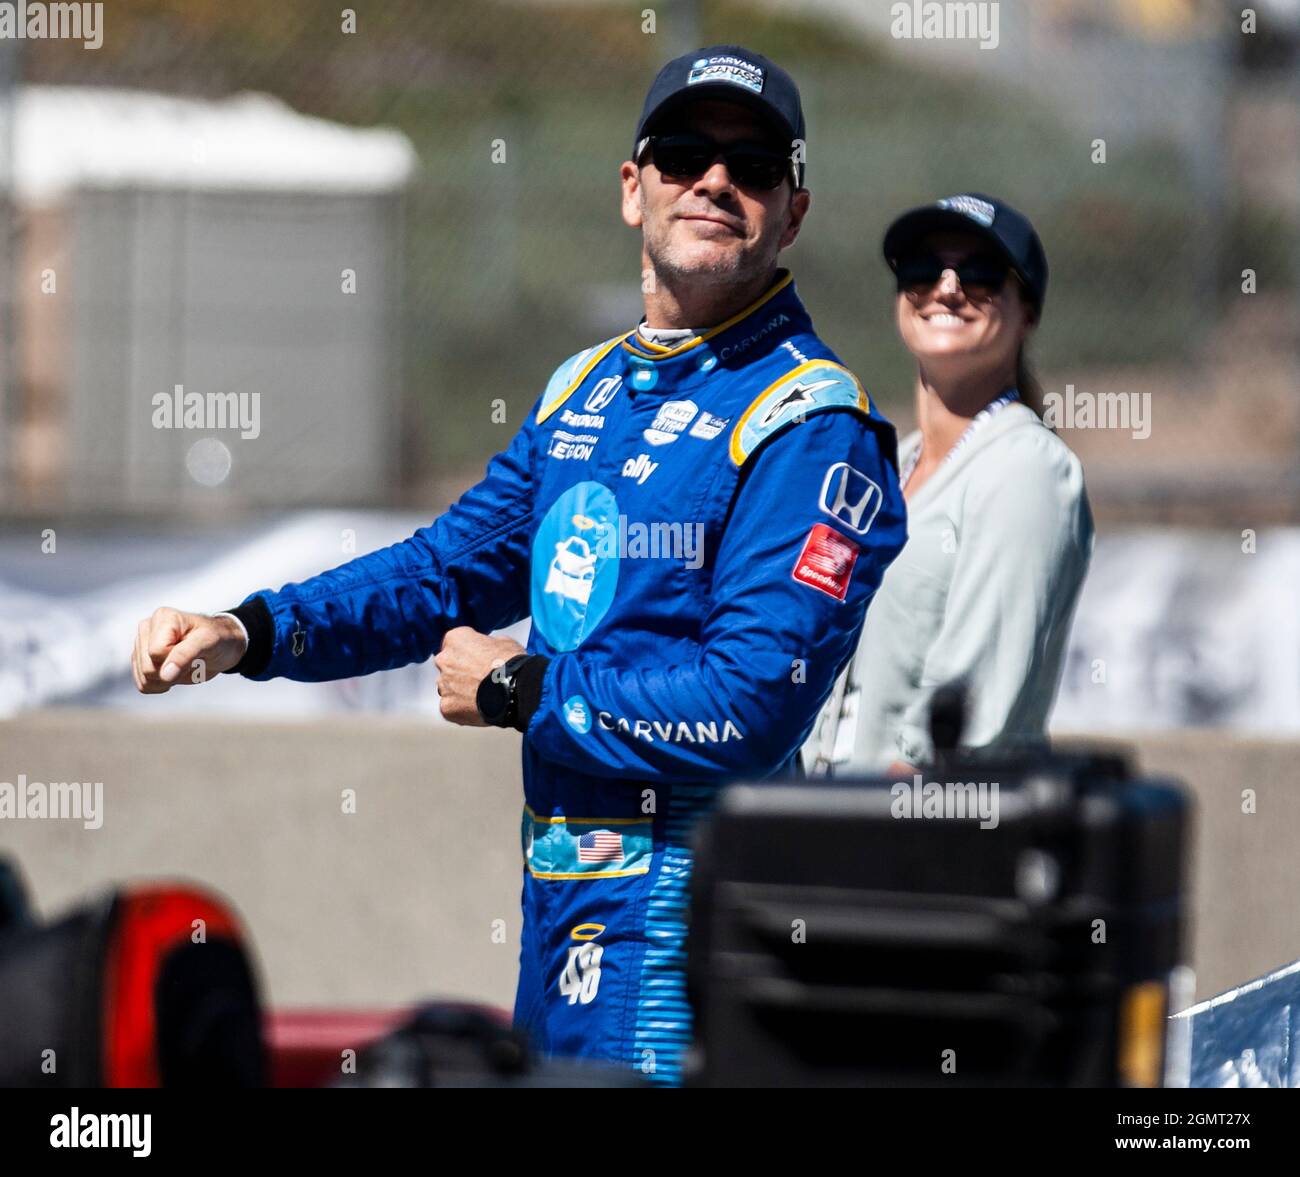 CAPTION CORRECTION: September 19 2021 Monterey CA, U.S.A. Chip Ganassi Racing driver Jimmie Johnson and wife on the grid before the NTT Firestone Grand Prix of Monterey Race at Weathertech Raceway Laguna Seca Monterey, CA Thurman James/CSM Stock Photo